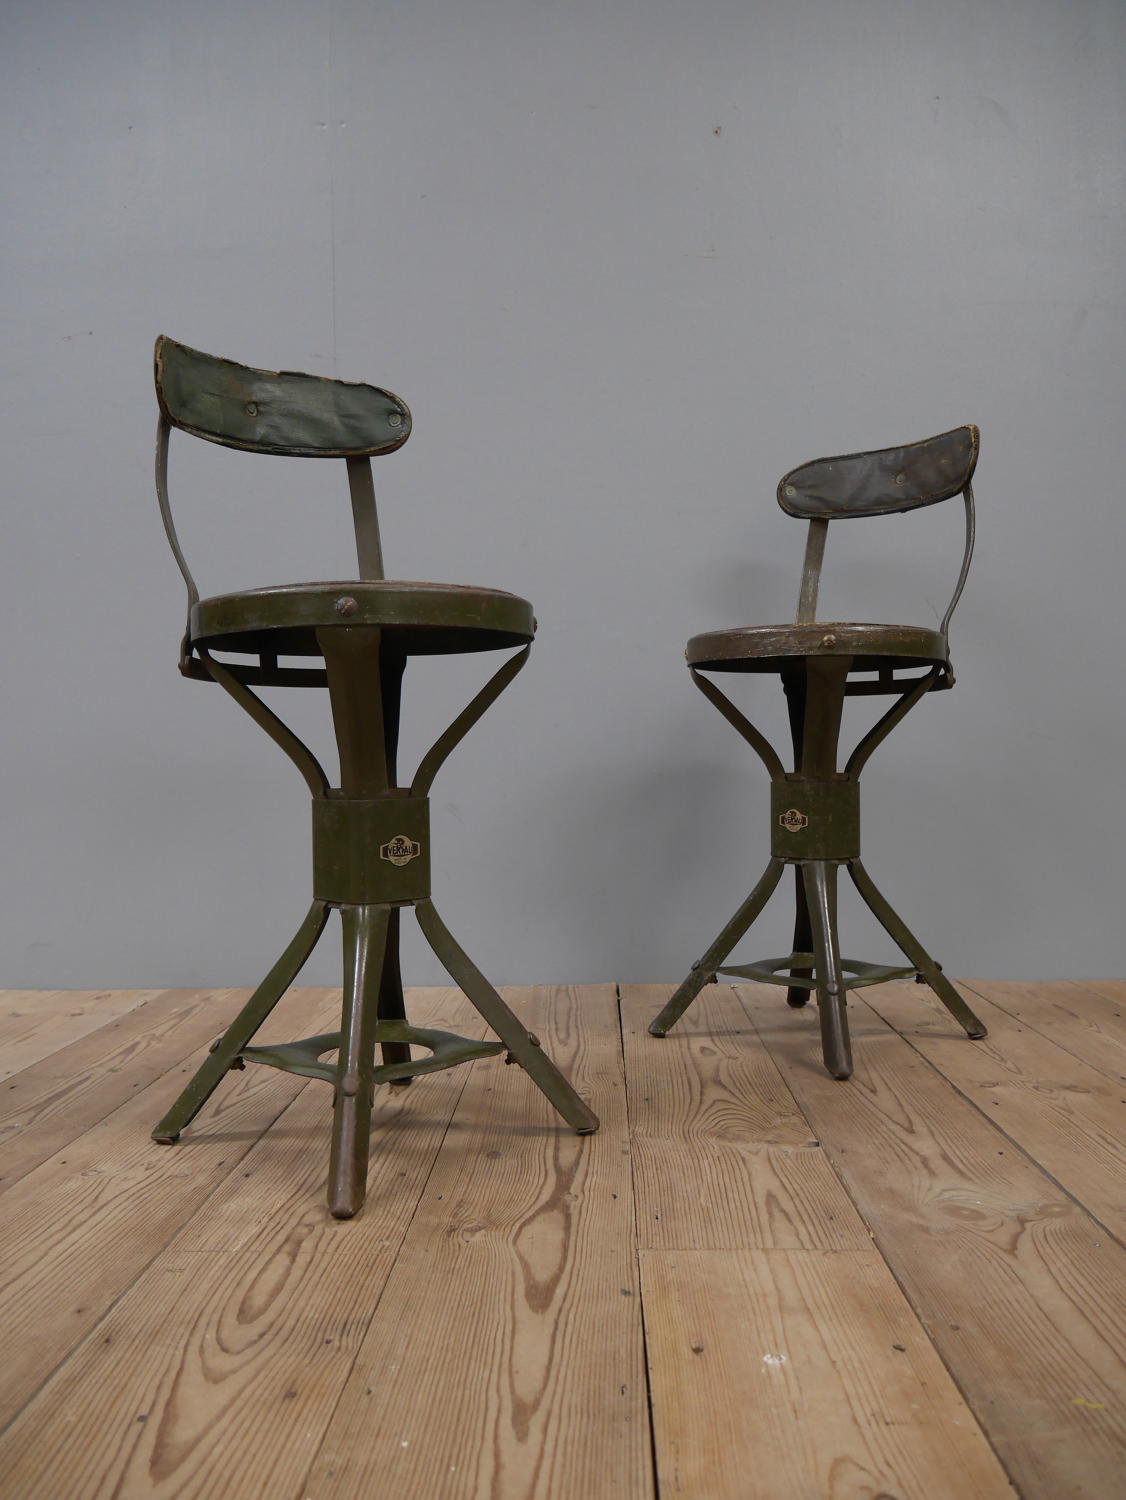 Evertaut Industrial Factory Chairs in Furniture